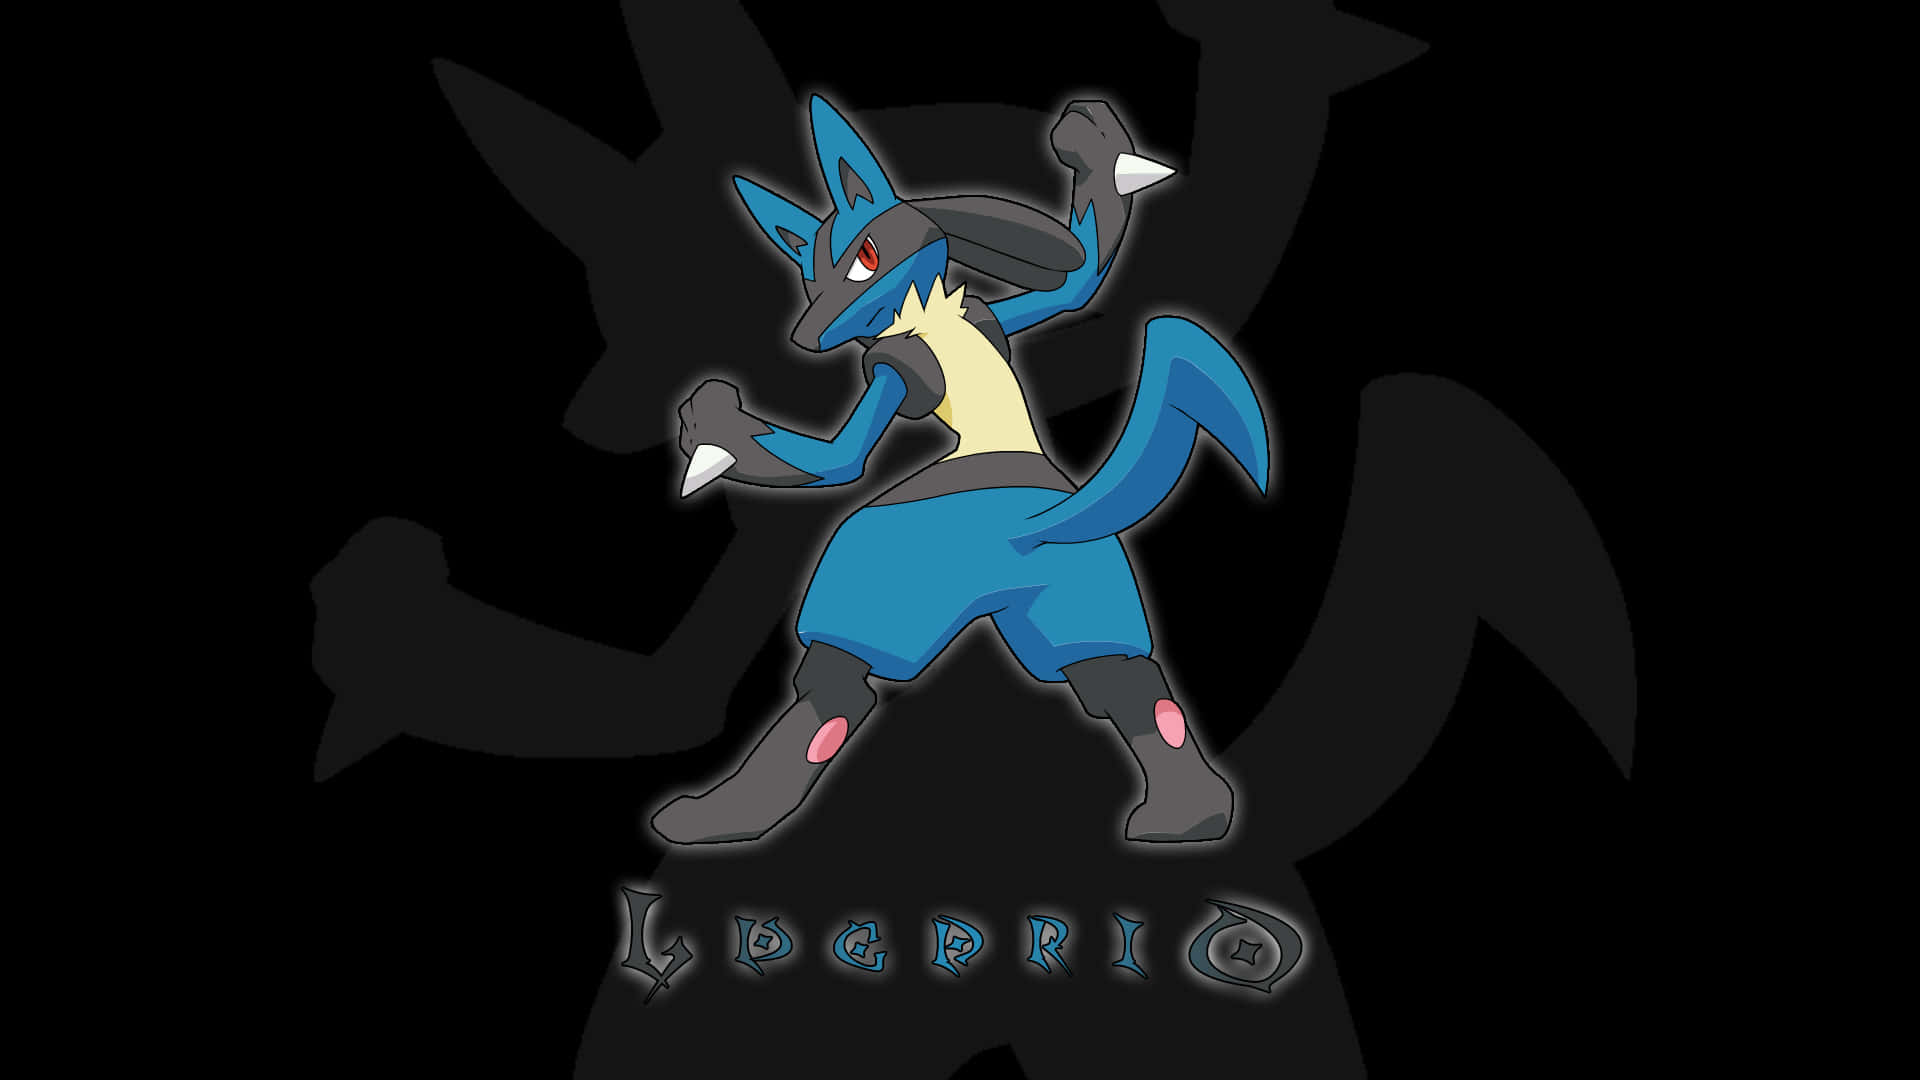 "Discover your inner strength with Lucario"